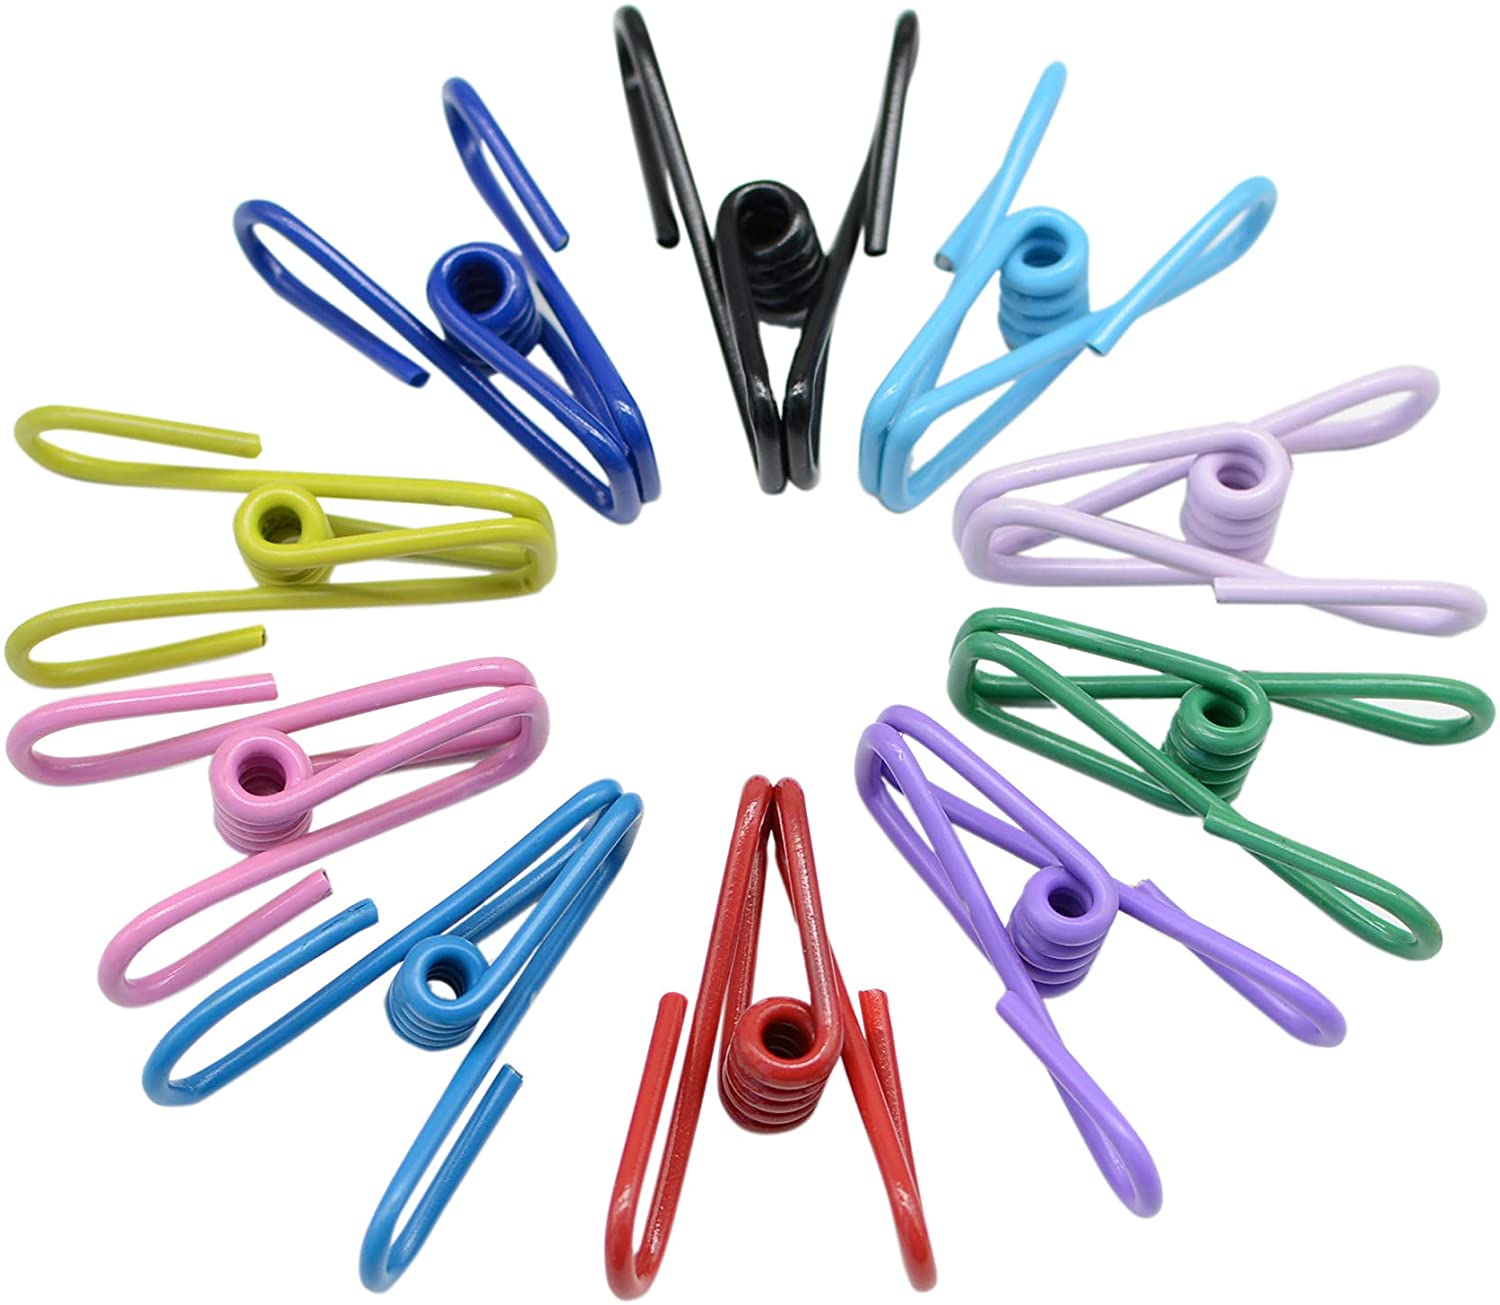 Bag Clips 3 Pack - Plastic Clips In 3 Colours Large, Food Bag Clips With  Air Tight Seal Grip, Chip Bag Clips For Snacks